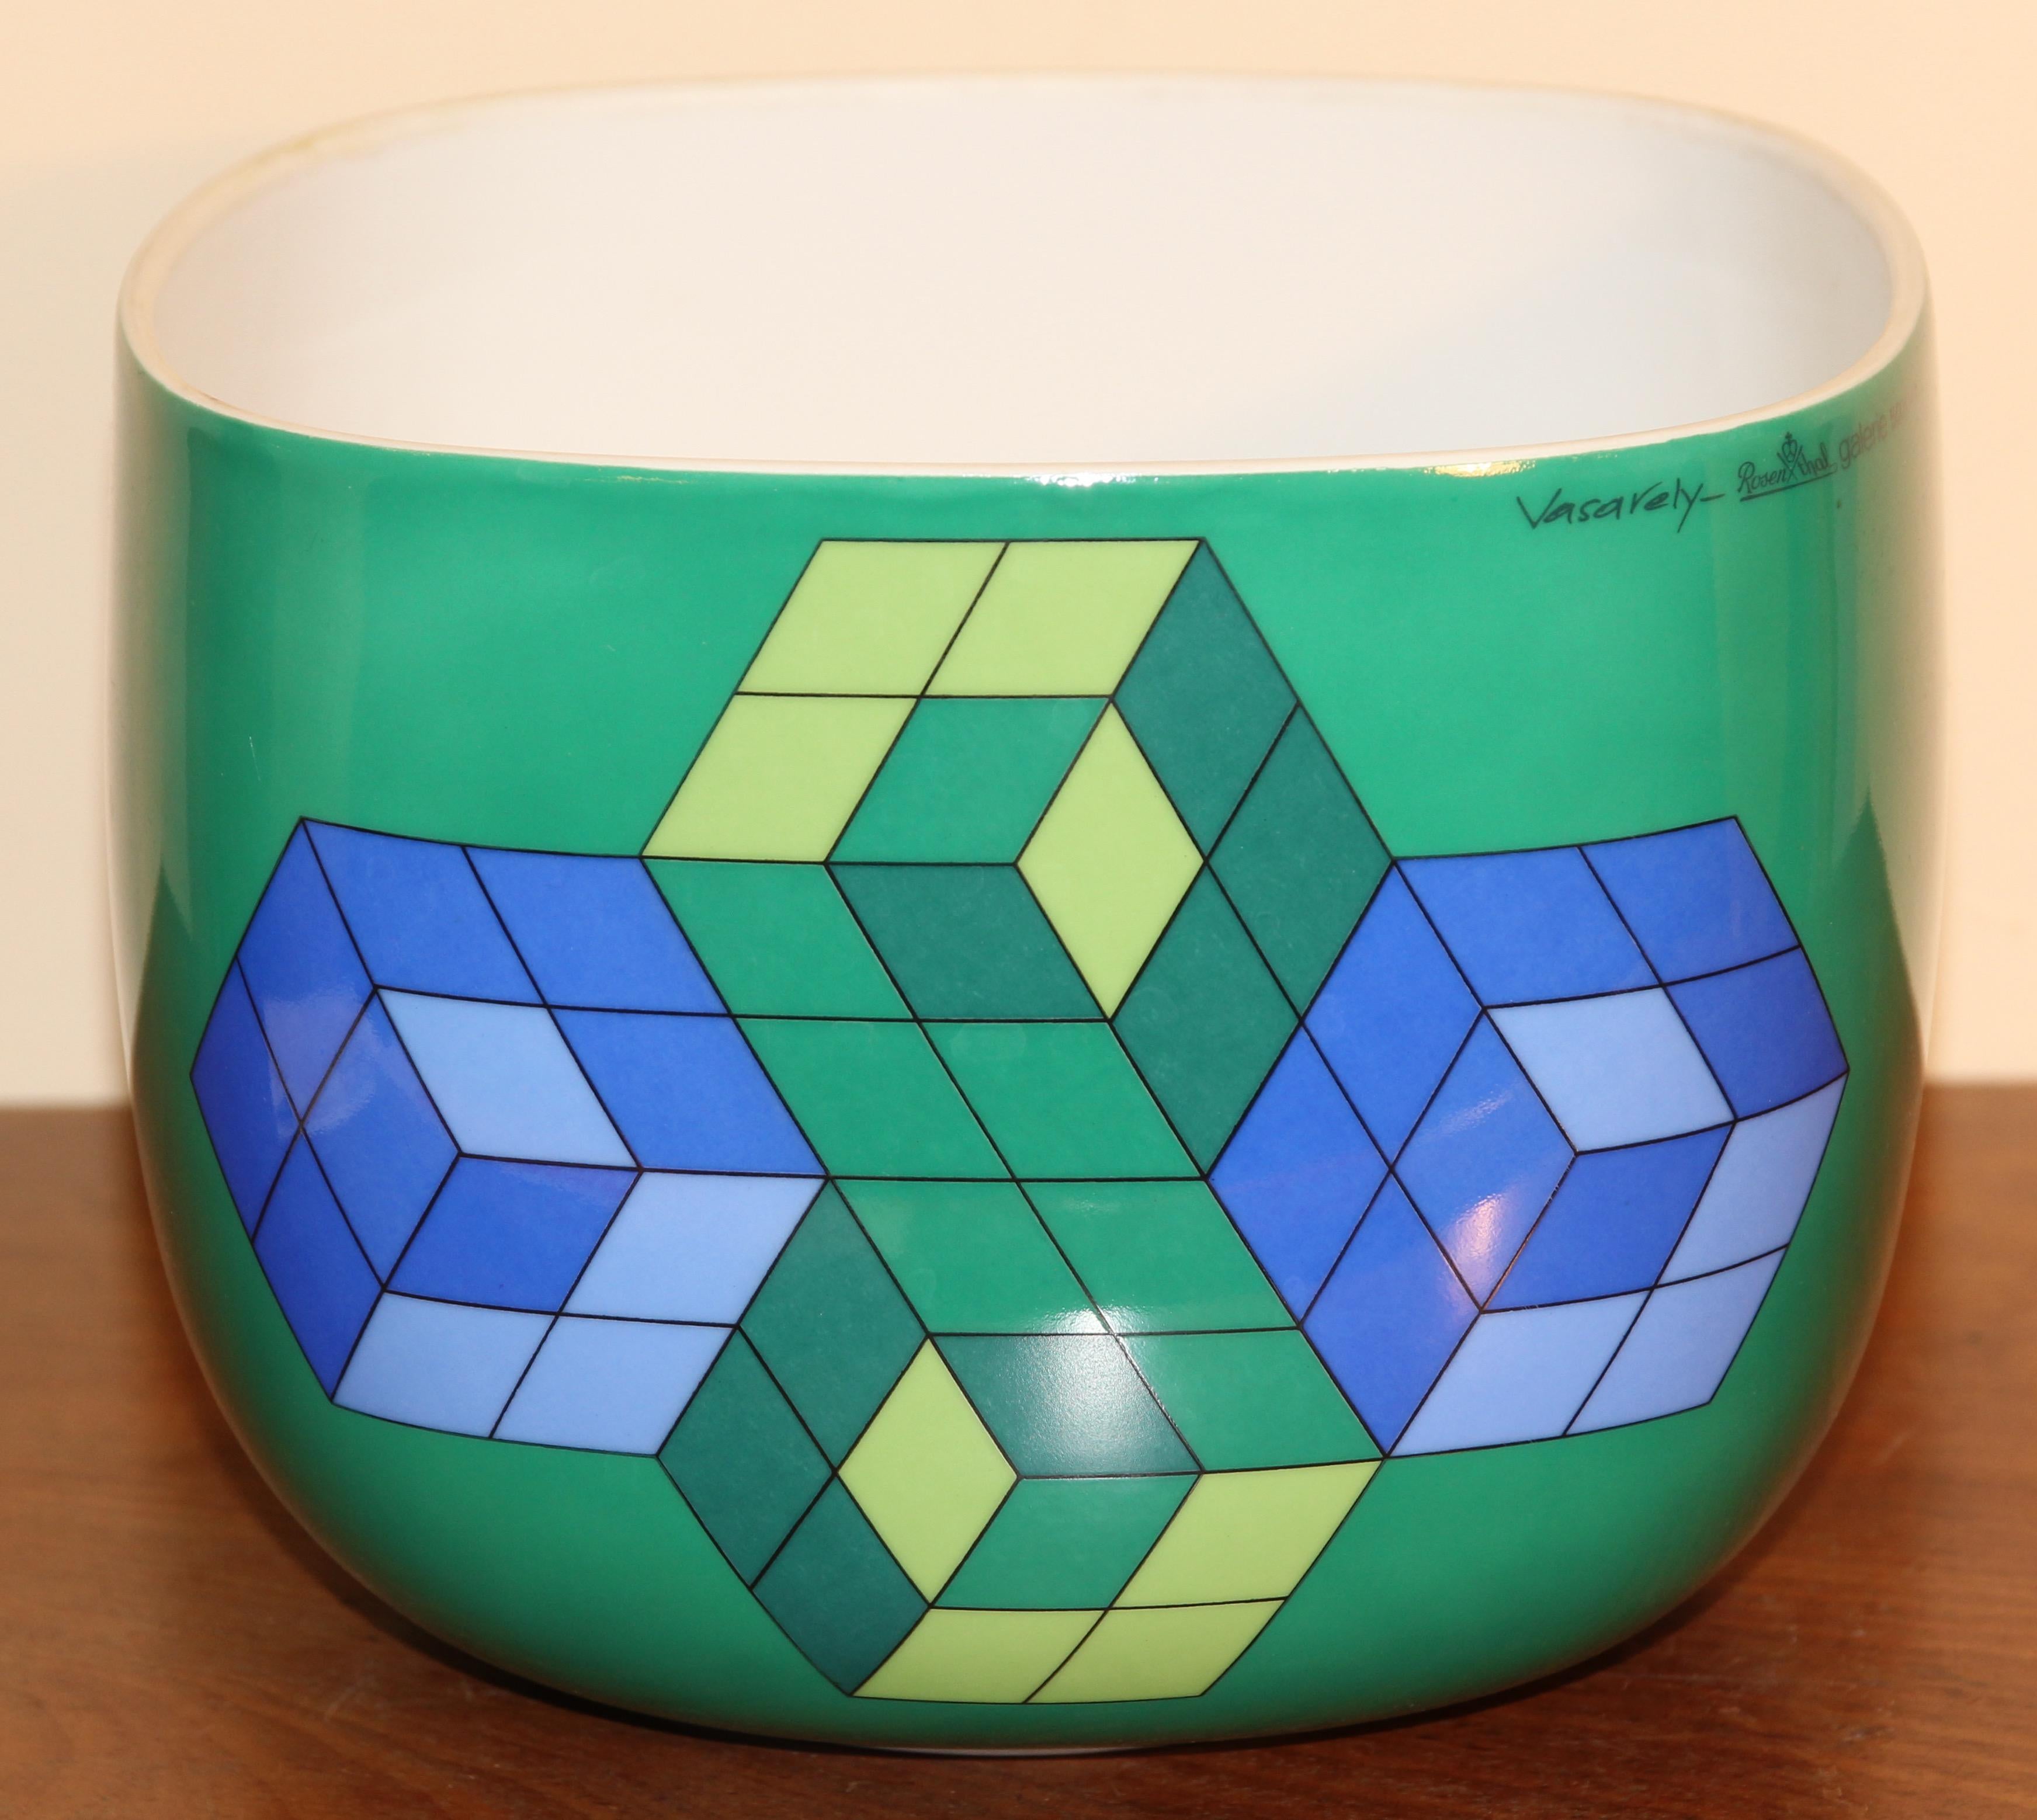 Decorative, large porcelain bowl by Rosenthal. Limited special edition by Victor Vasarely.

Undamaged.